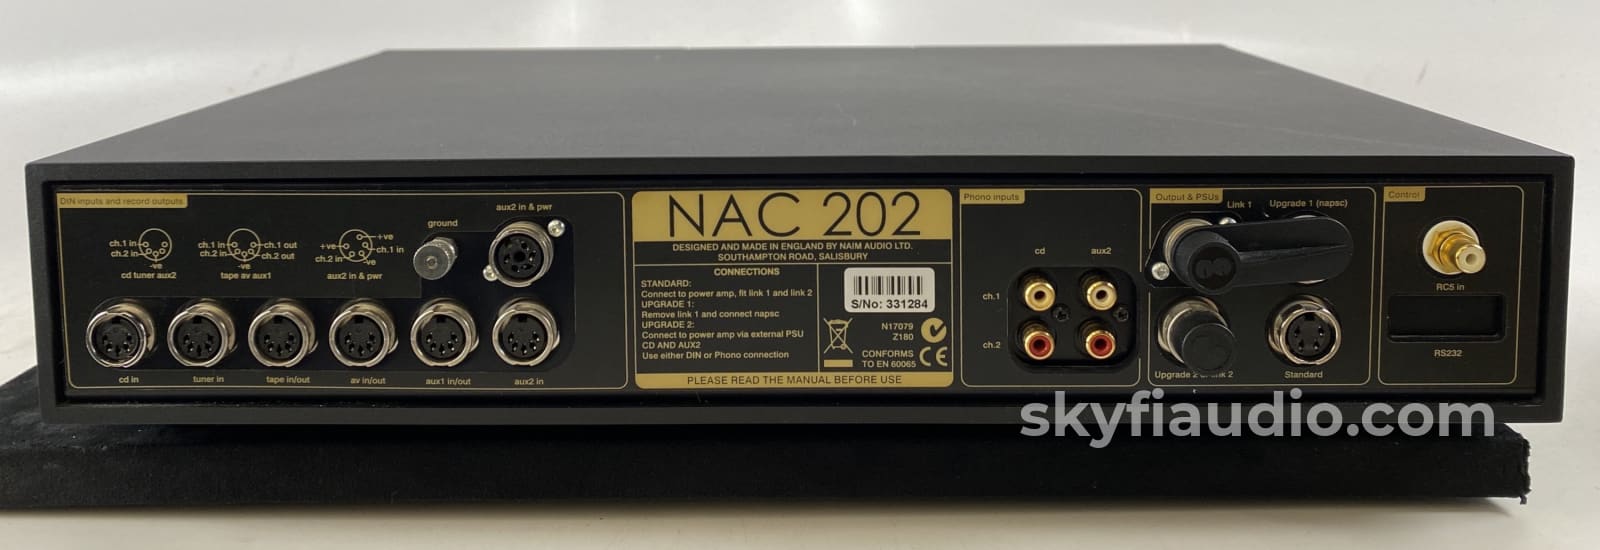 Naim Nac 202 Stereo Preamplifier With Remote - New Price